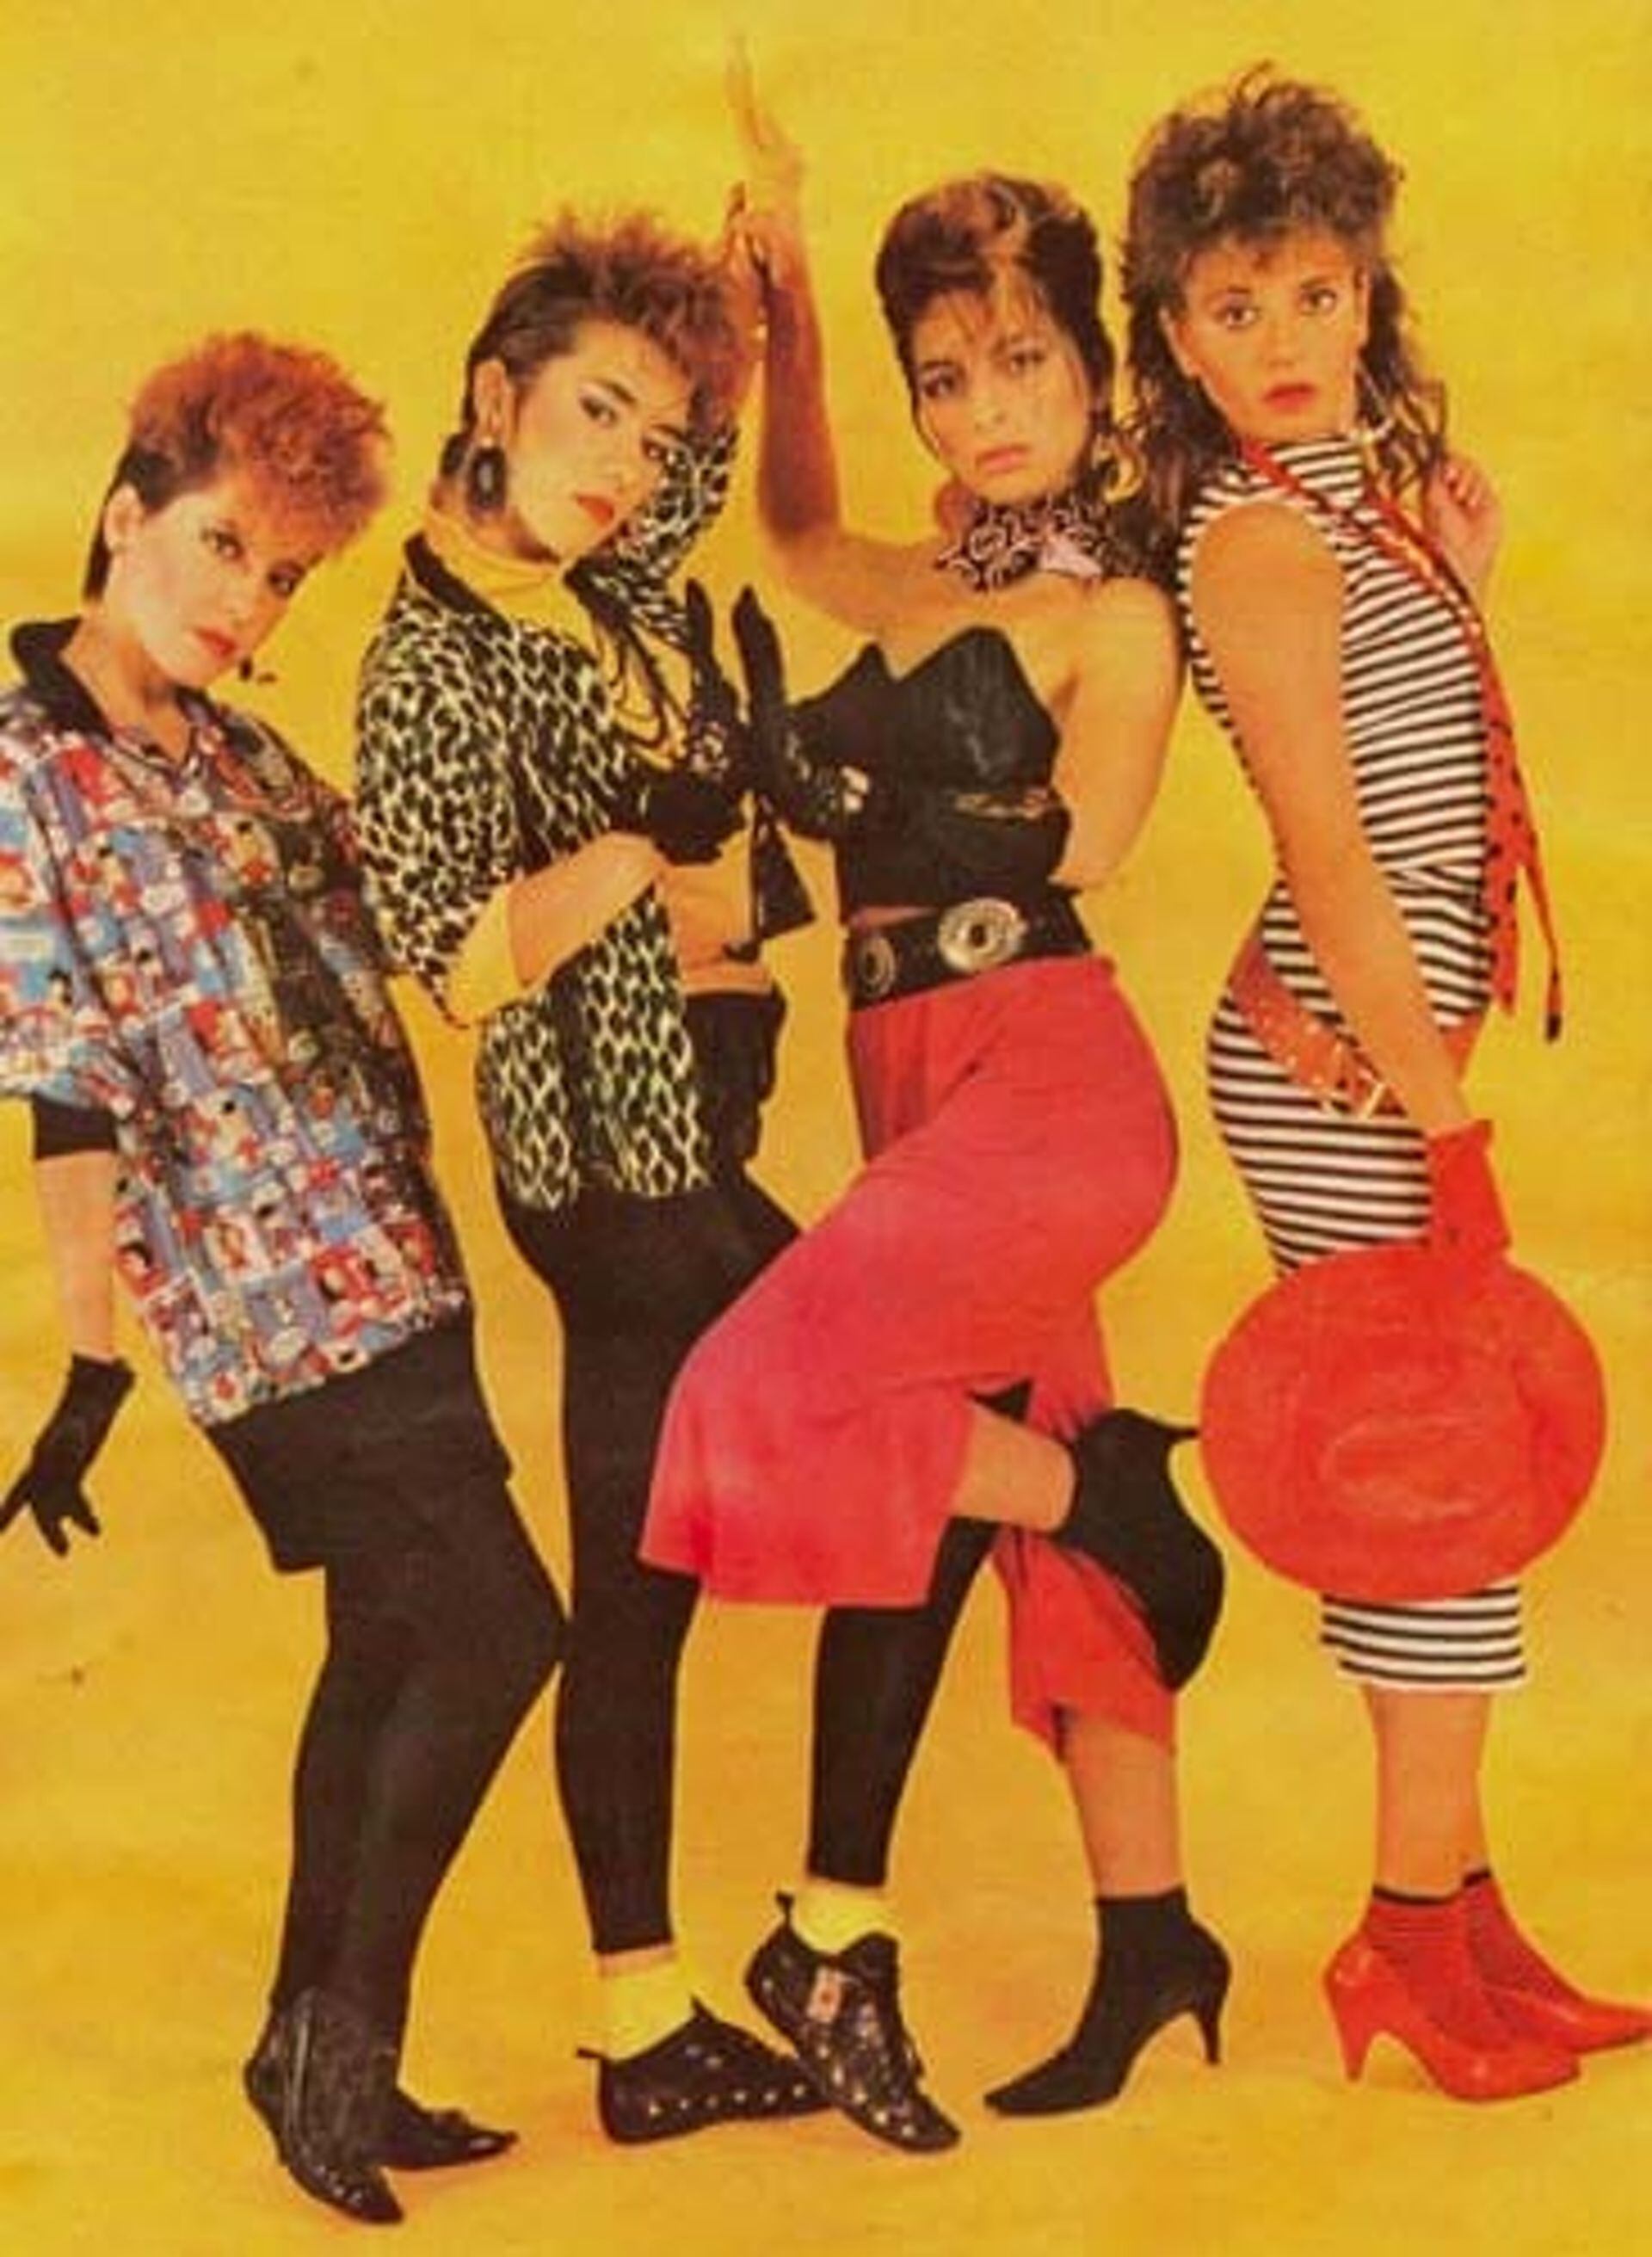 Las Viudas and that classic explosion of colors from the 80s